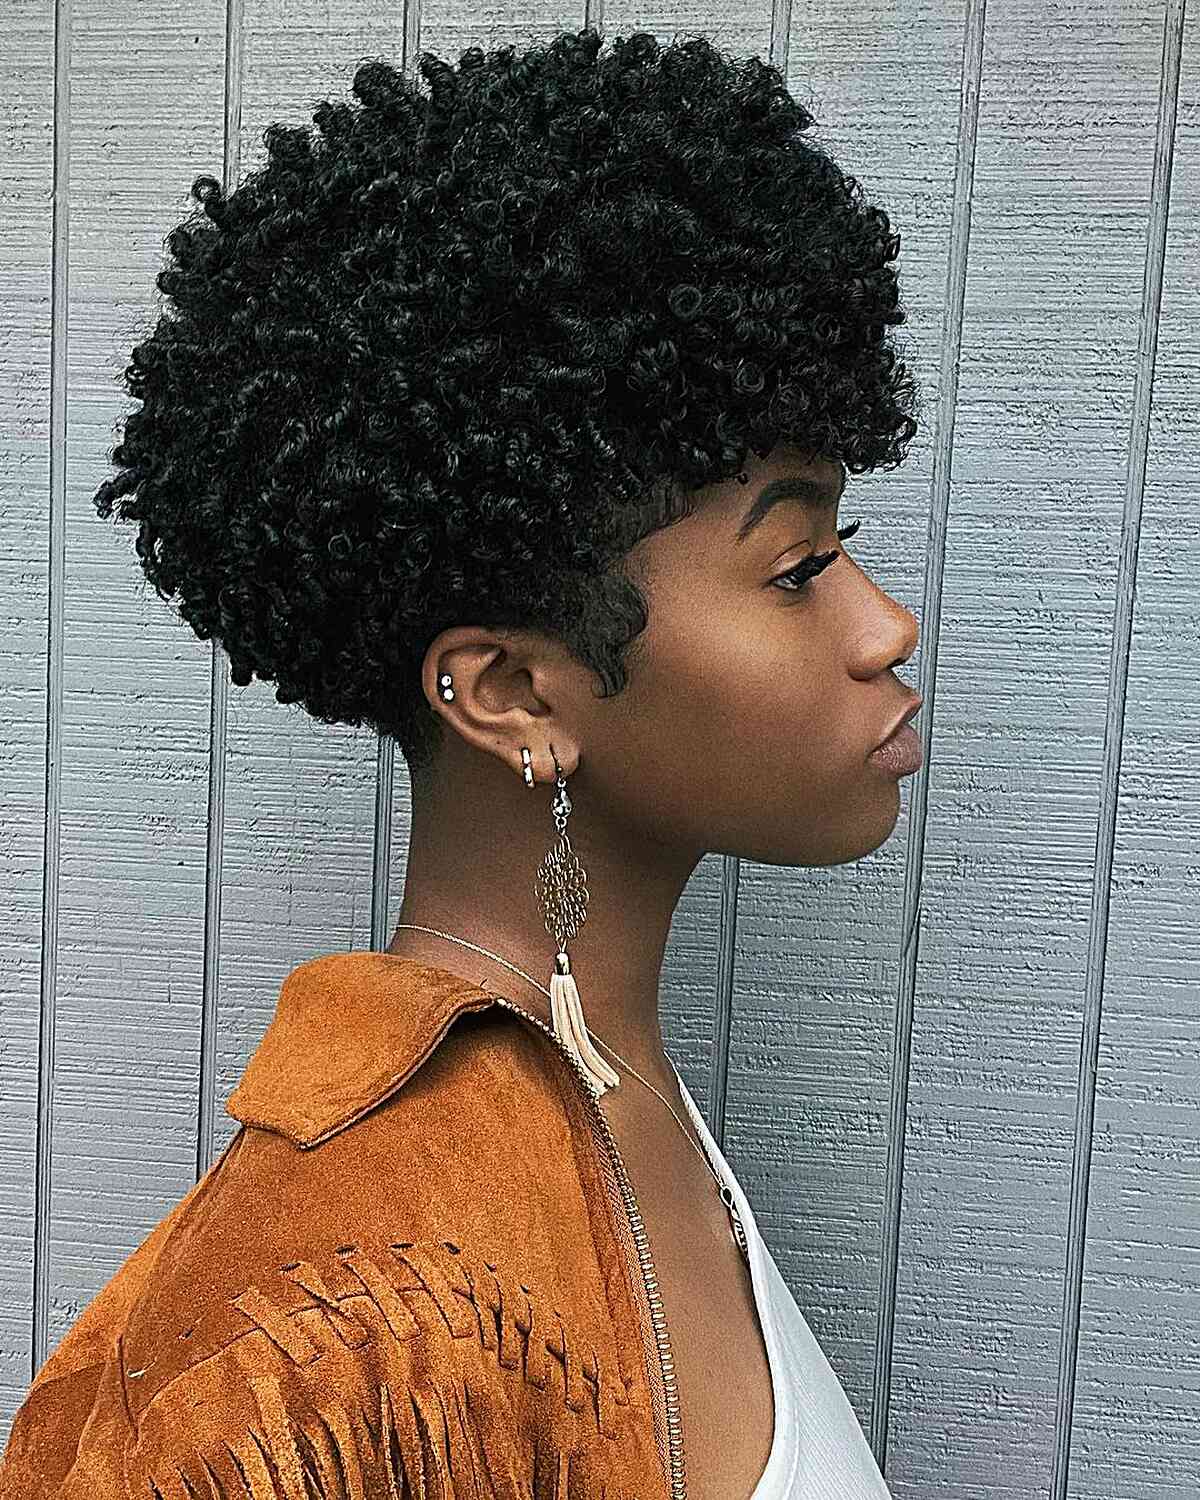 Afro Inspo from Small to Huge | Unruly | Short afro hairstyles, Short hair  black, Short black hairstyles